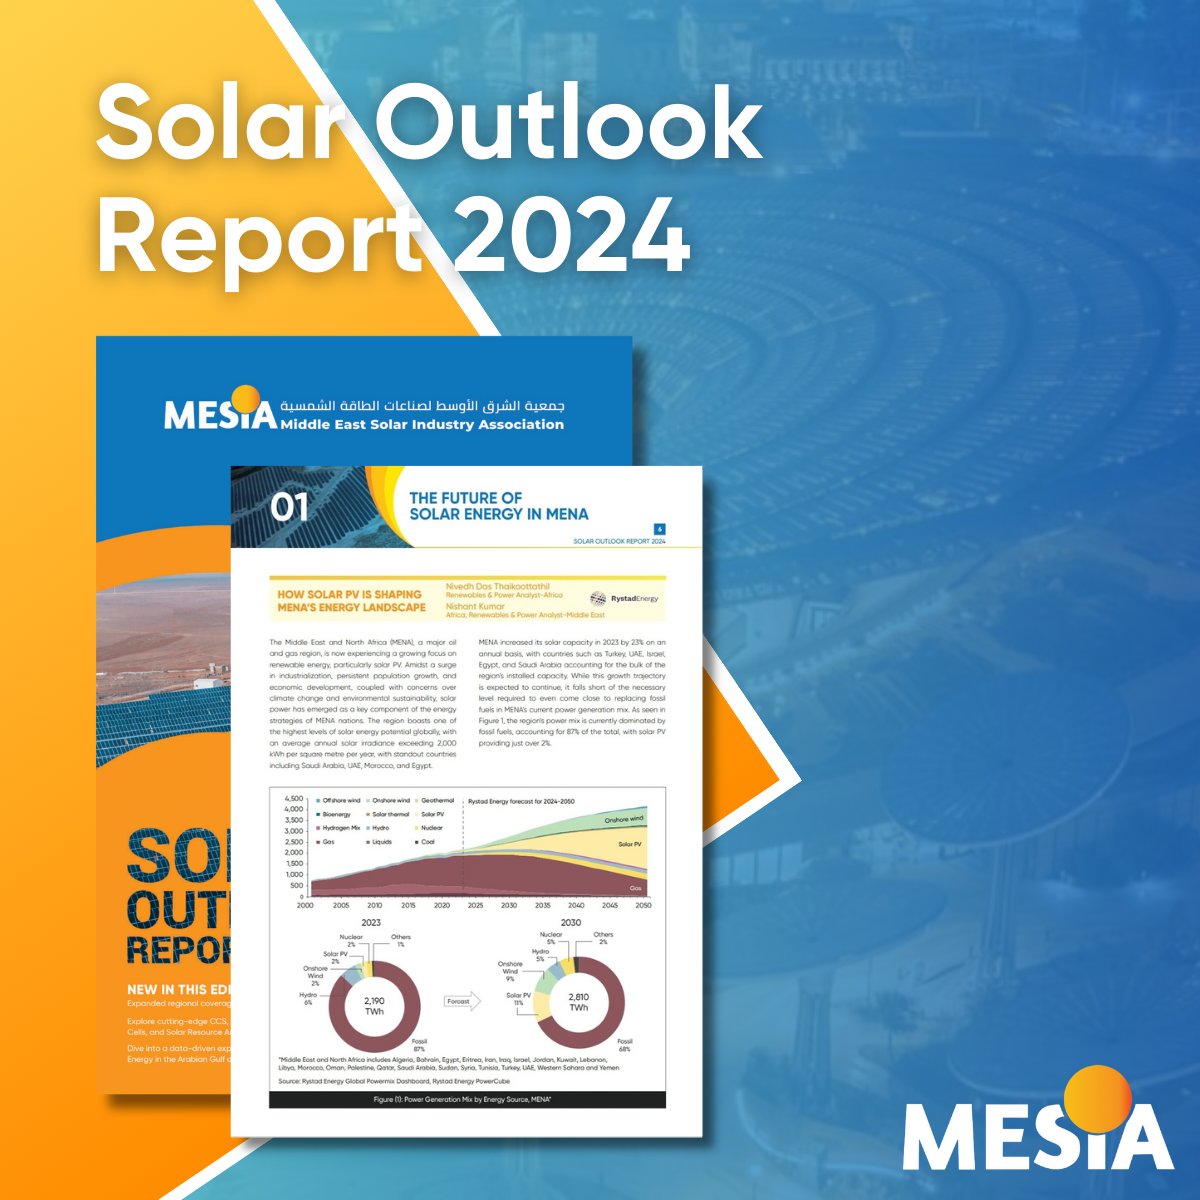 Discover how the Middle East and North Africa (MENA) region, renowned for its oil and gas resources, is now turning its focus towards renewable energy, particularly solar PV. Download your copy: ow.ly/N9CT50RTRA9 #sustainability #future #SOR2024 #MESIAreport